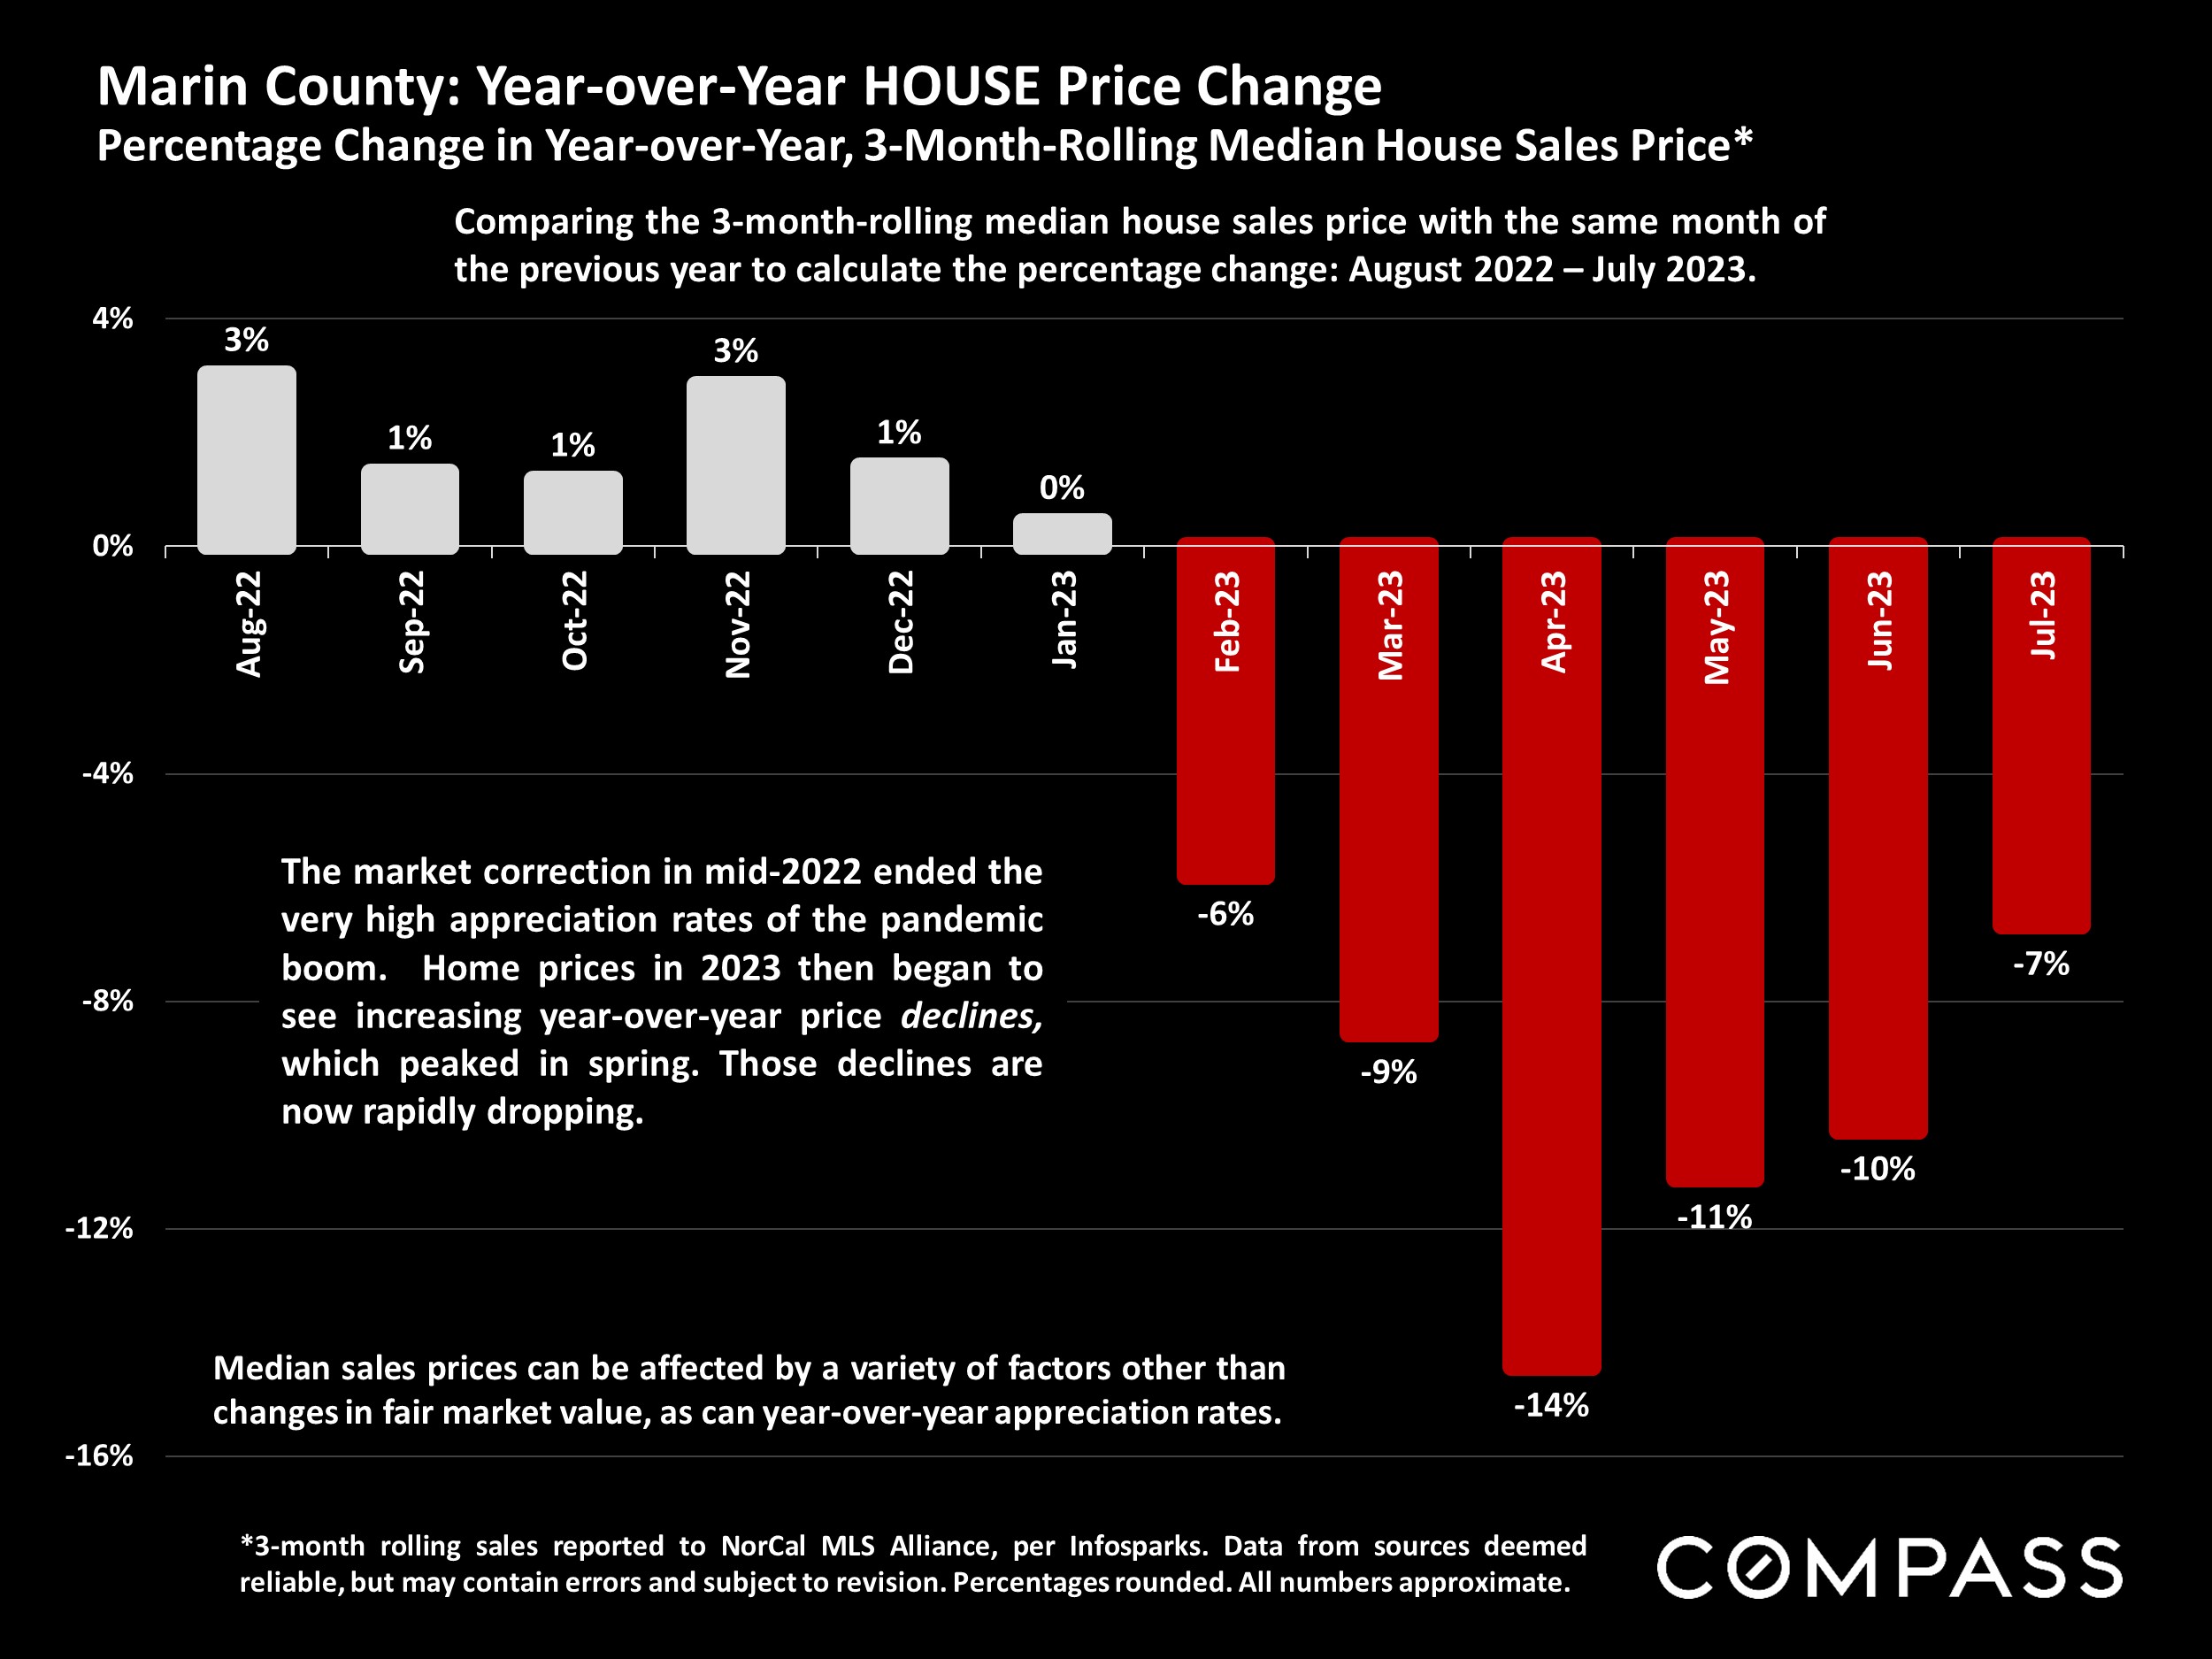 Marin County: Year-over-Year HOUSE Price Change Percentage Change in Year-over-Year, 3-Month-Rolling Median House Sales Price*